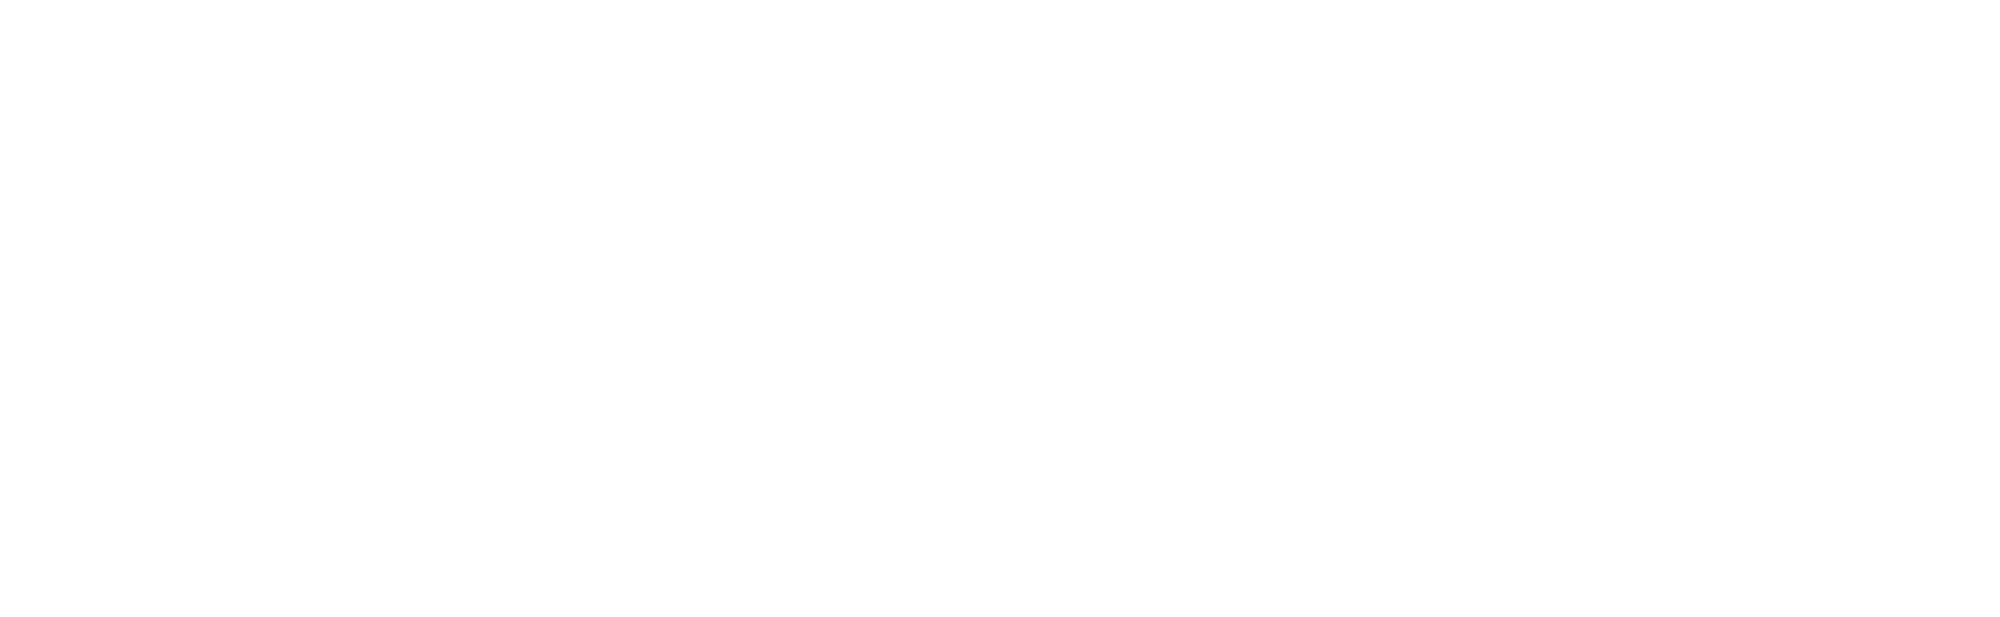 Coral Cliffs Tours + Townhomes